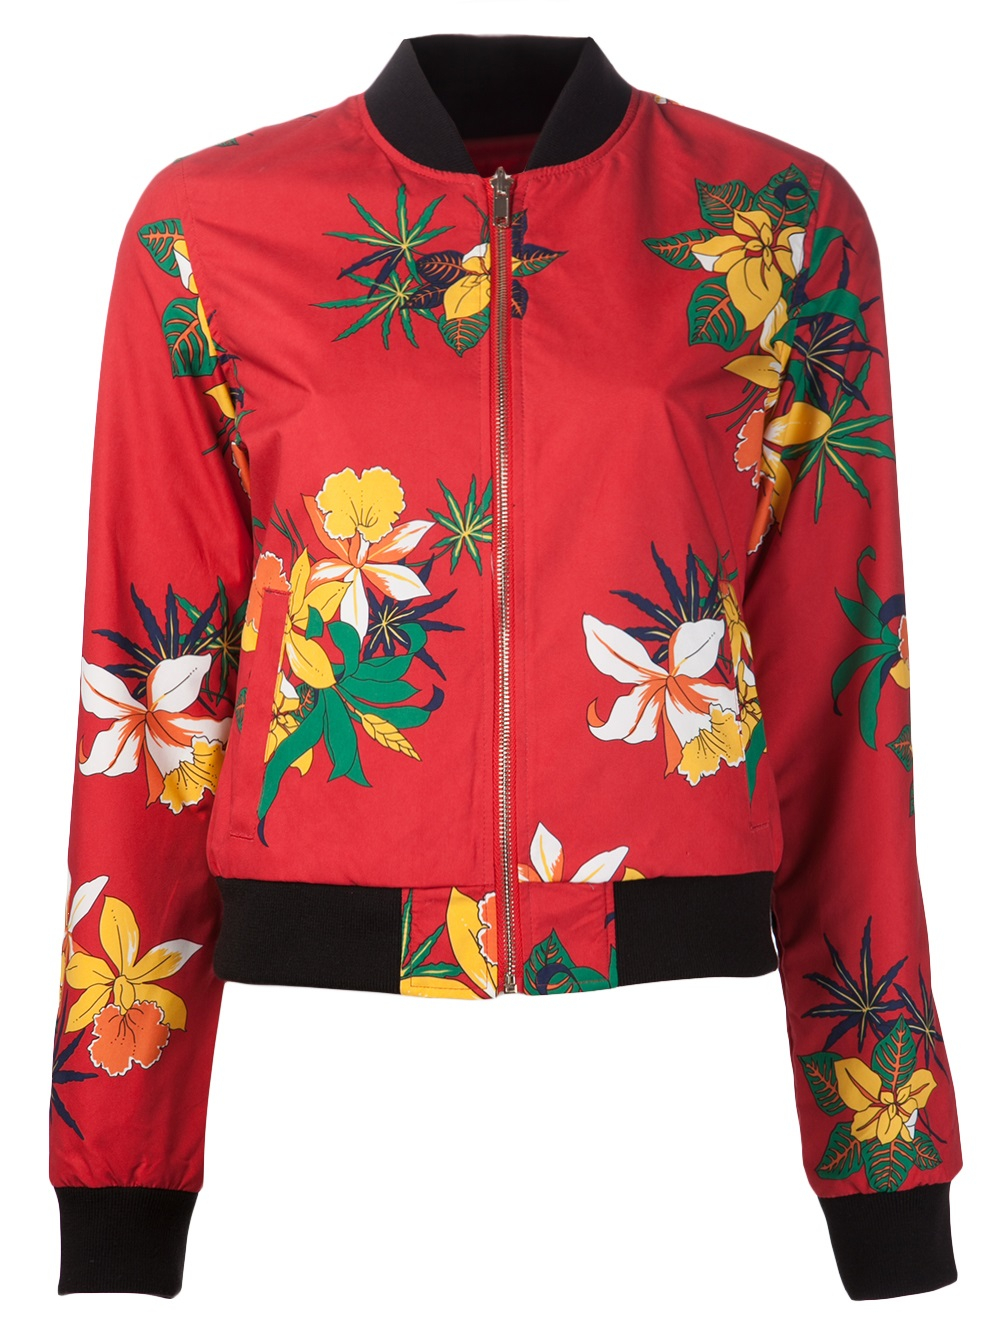 Lyst - Obey Fast Times Reversible Bomber Jacket